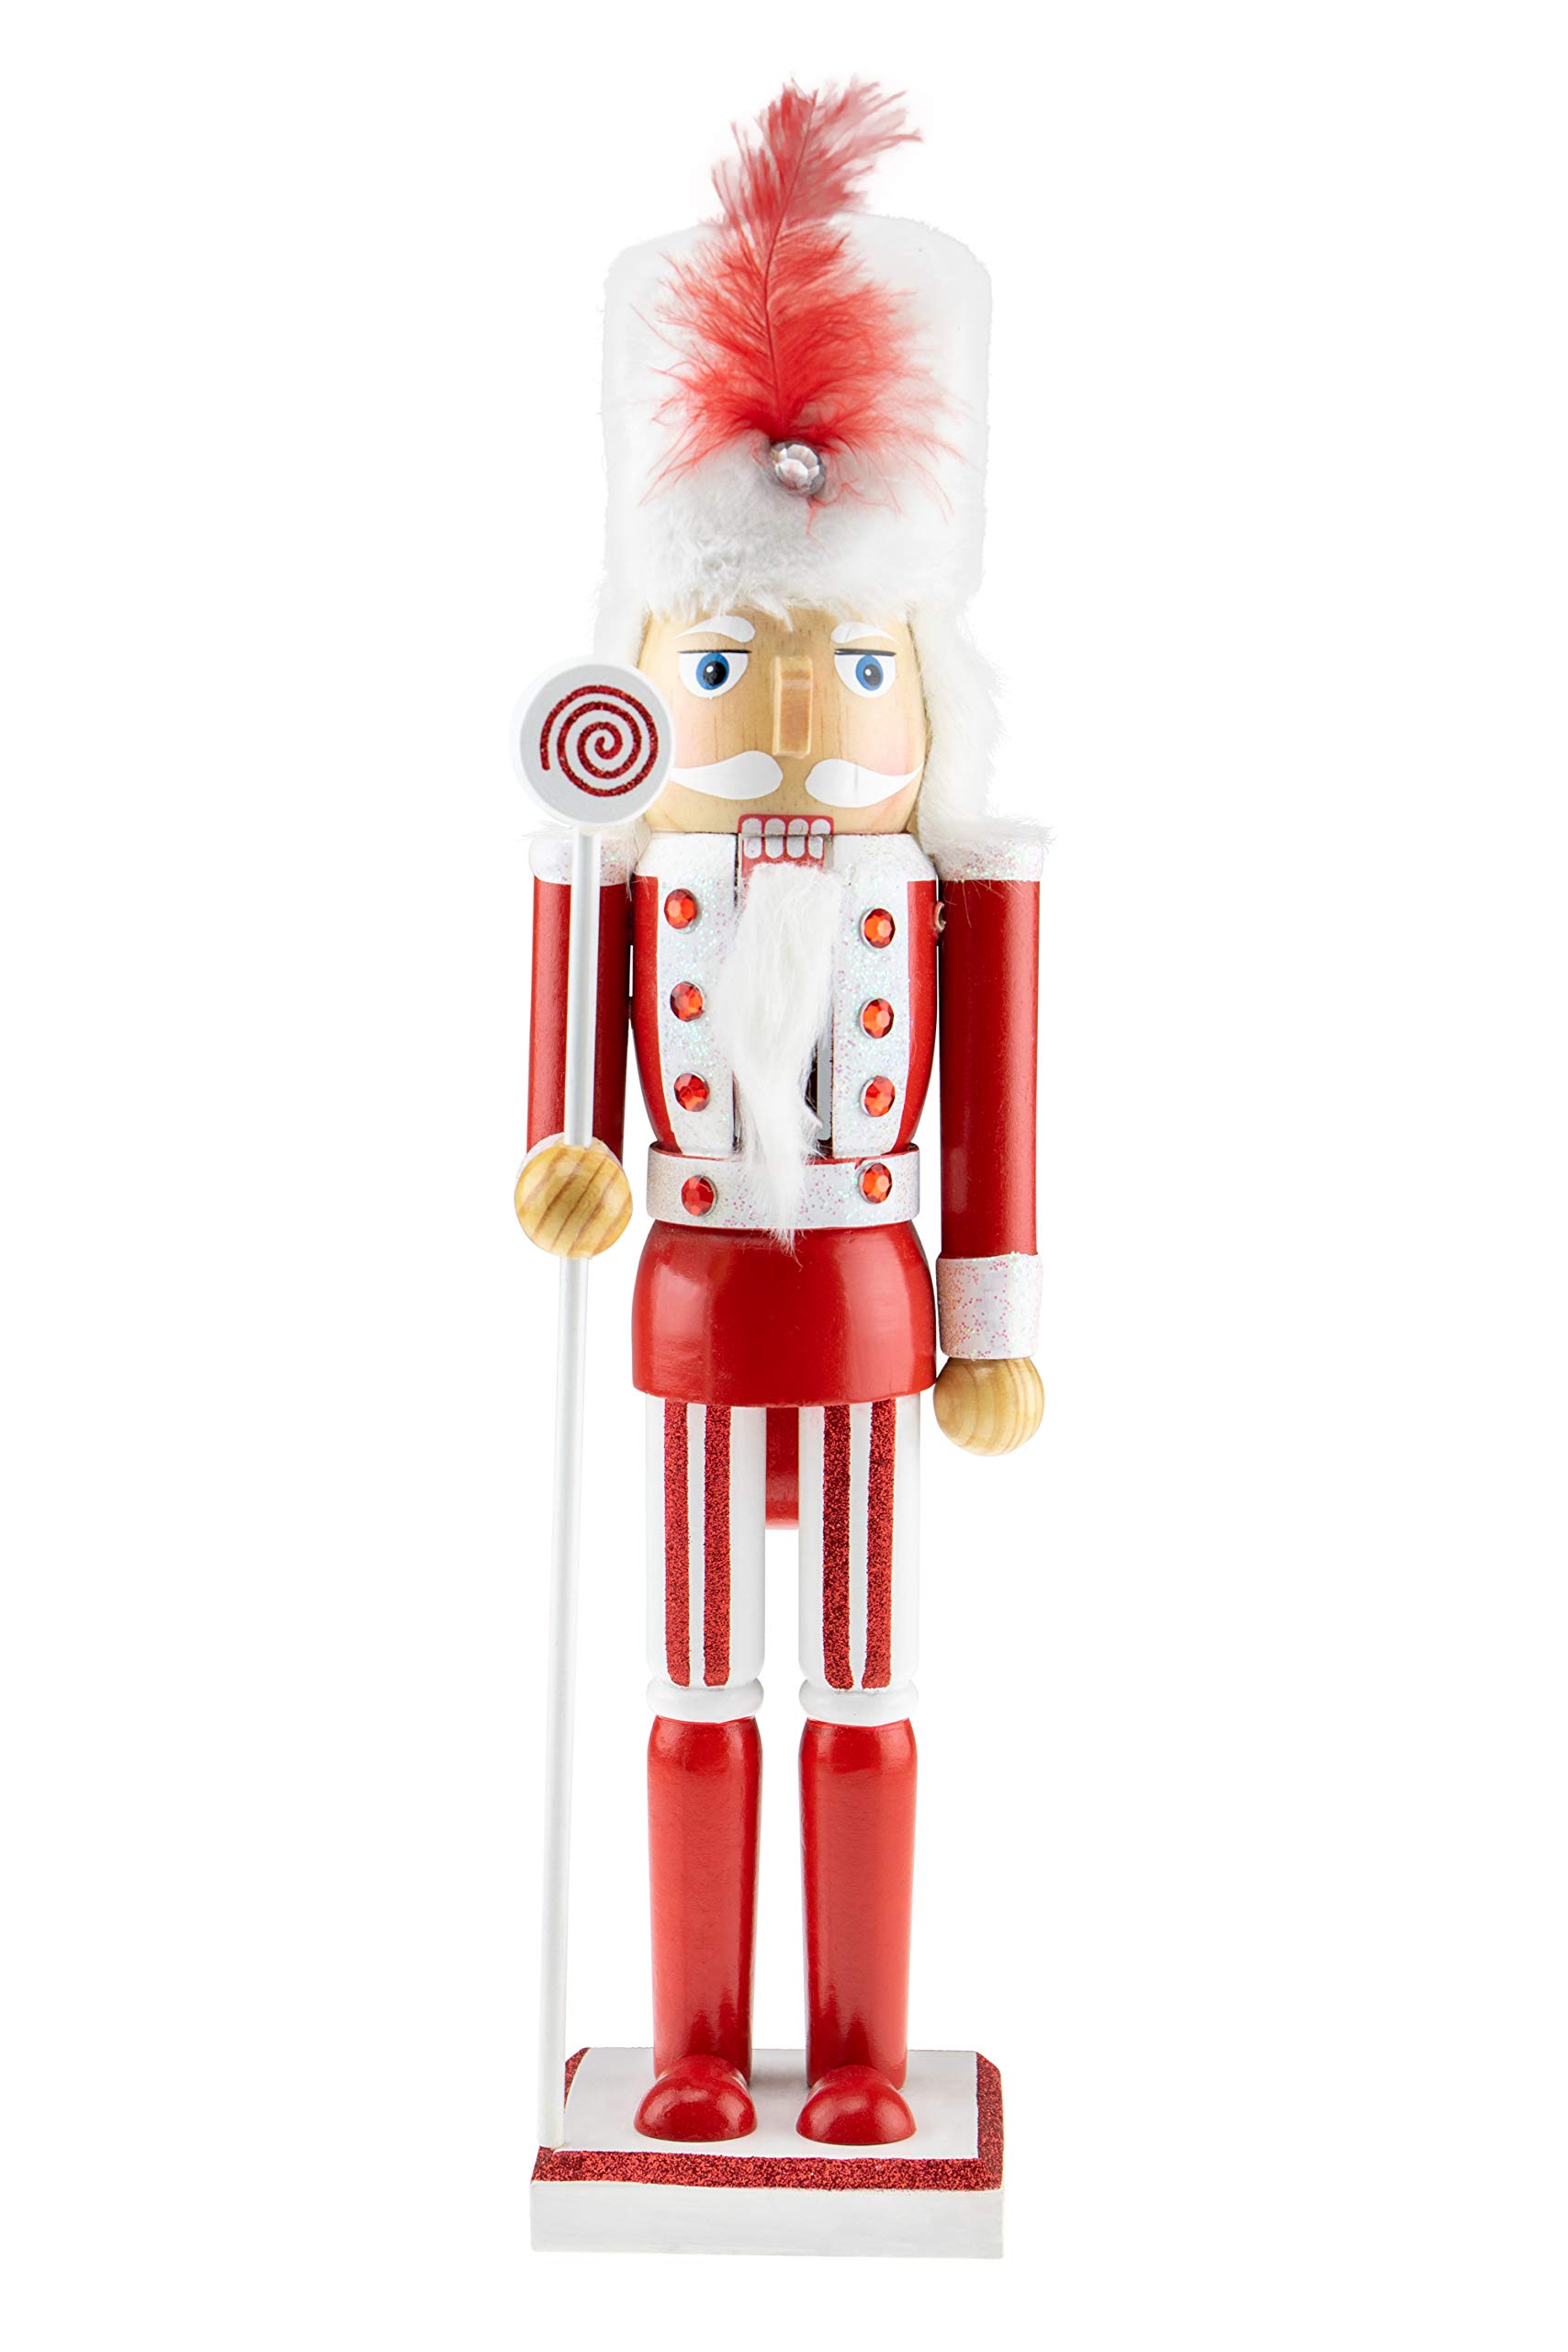 Clever Creations Red Candyman 15 Inch Traditional Wooden Nutcracker, Festive Christmas Décor for Shelves and Tables